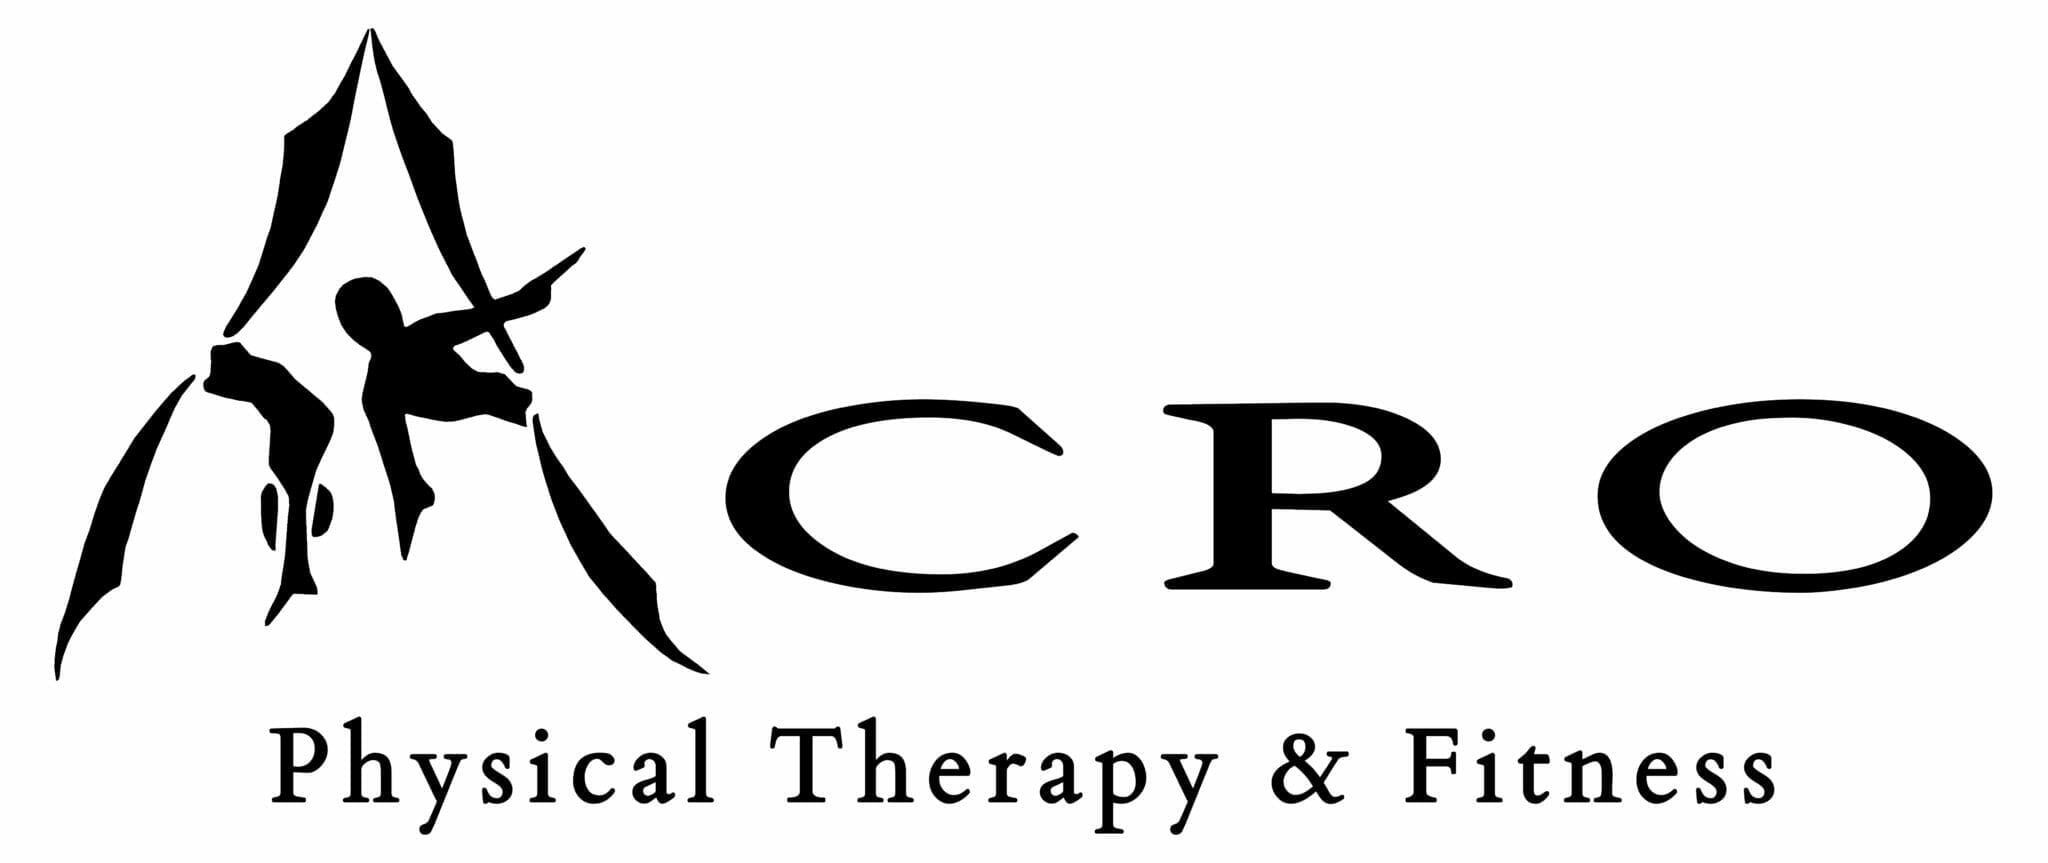 Acro Physical Therapy & Fitness logo